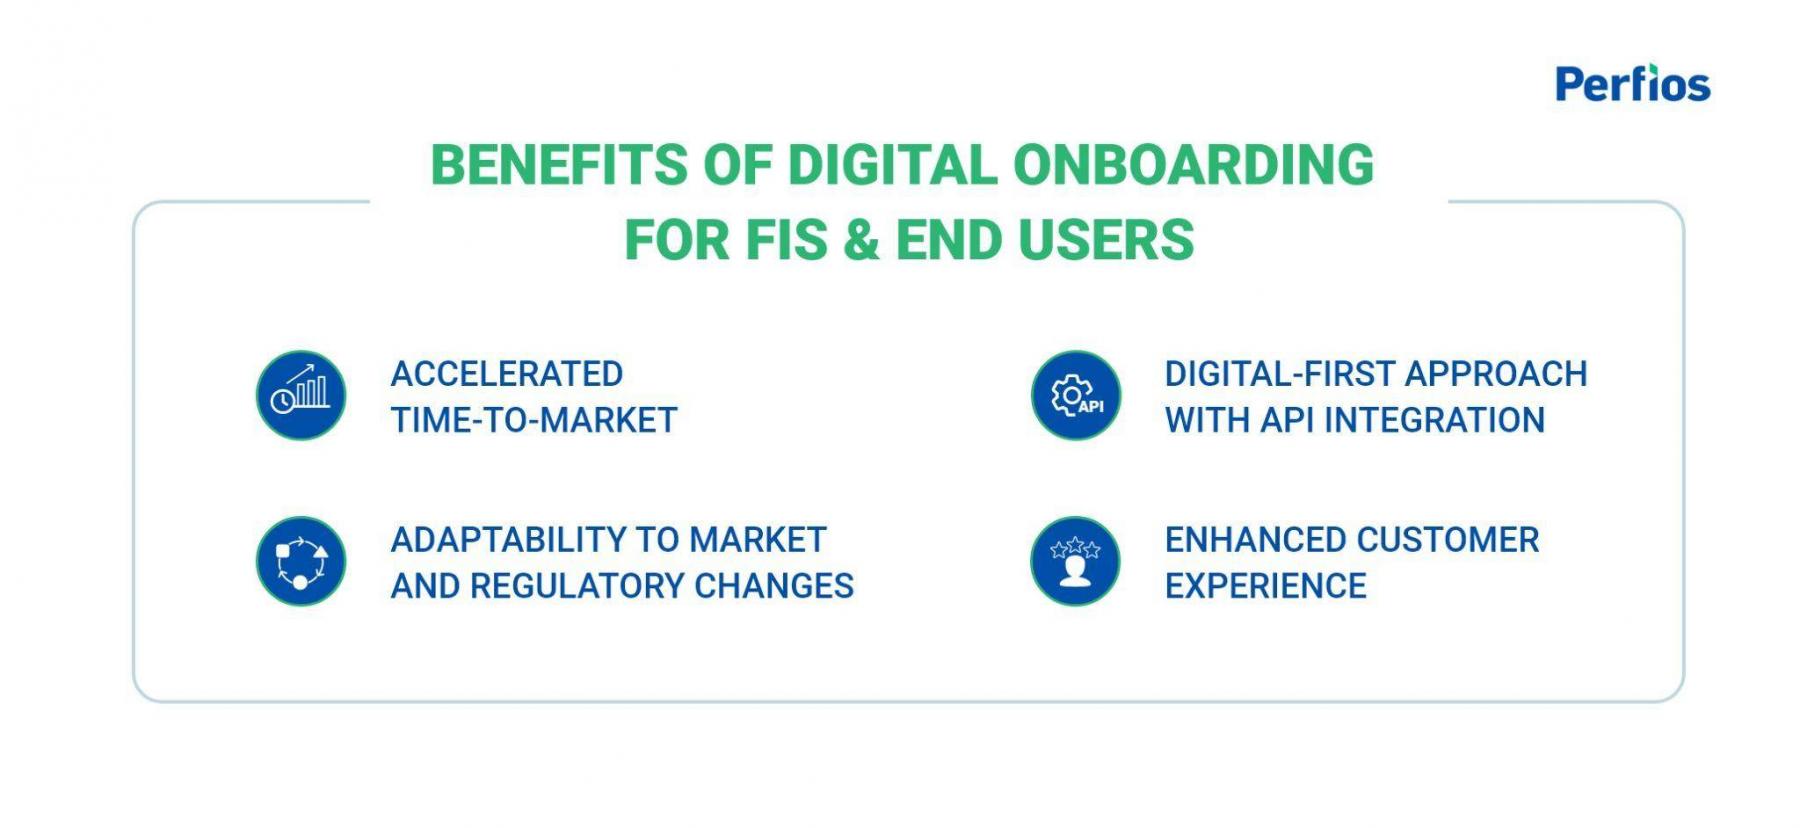 How Digital Onboarding Benefits FIs and End Users?